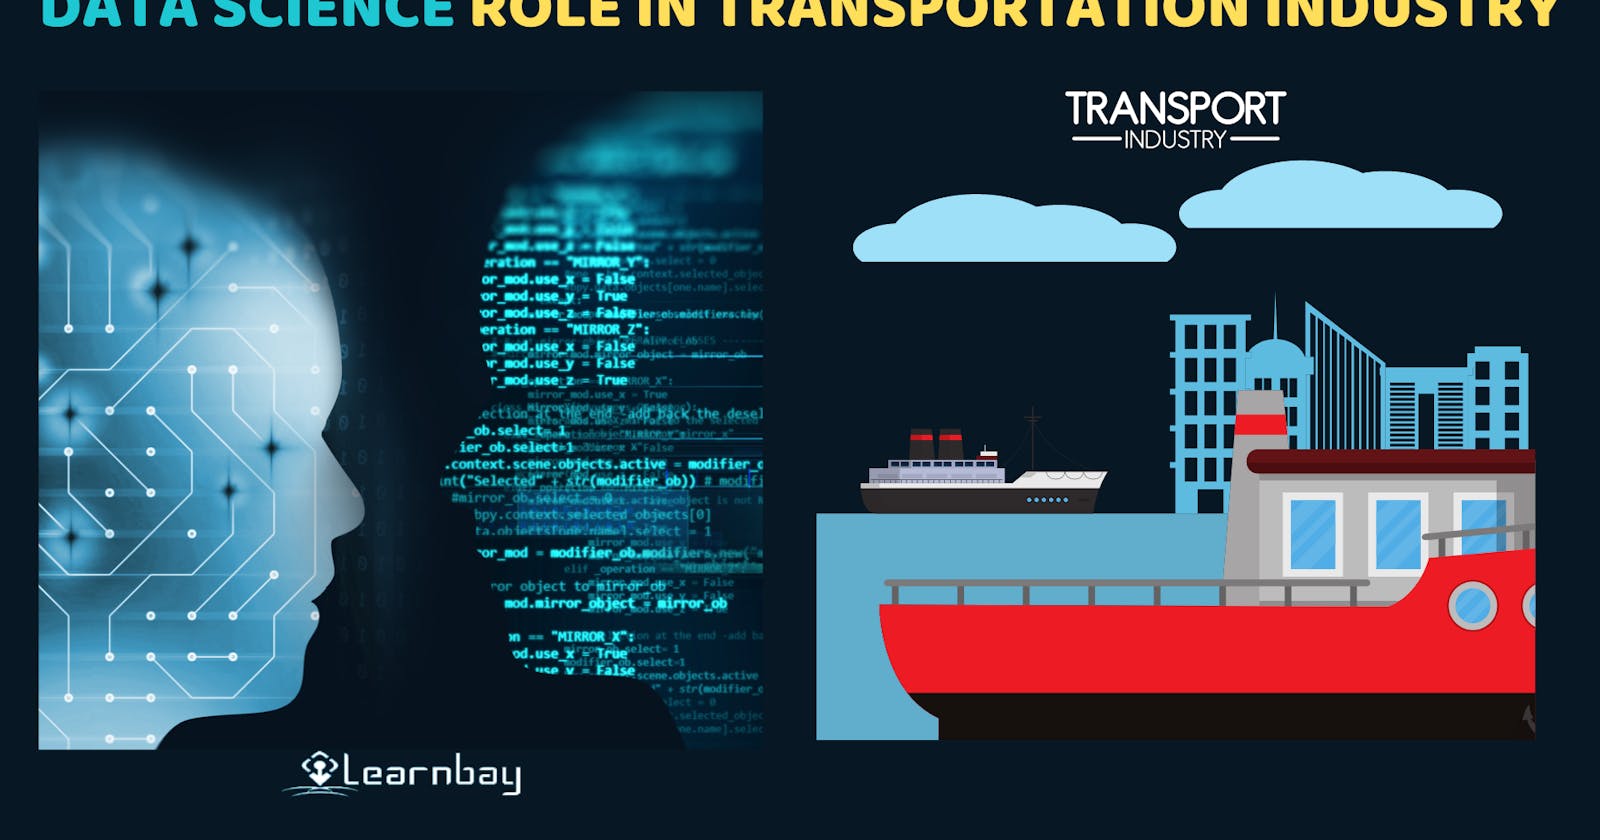 Data Science Role in Transportation Industry